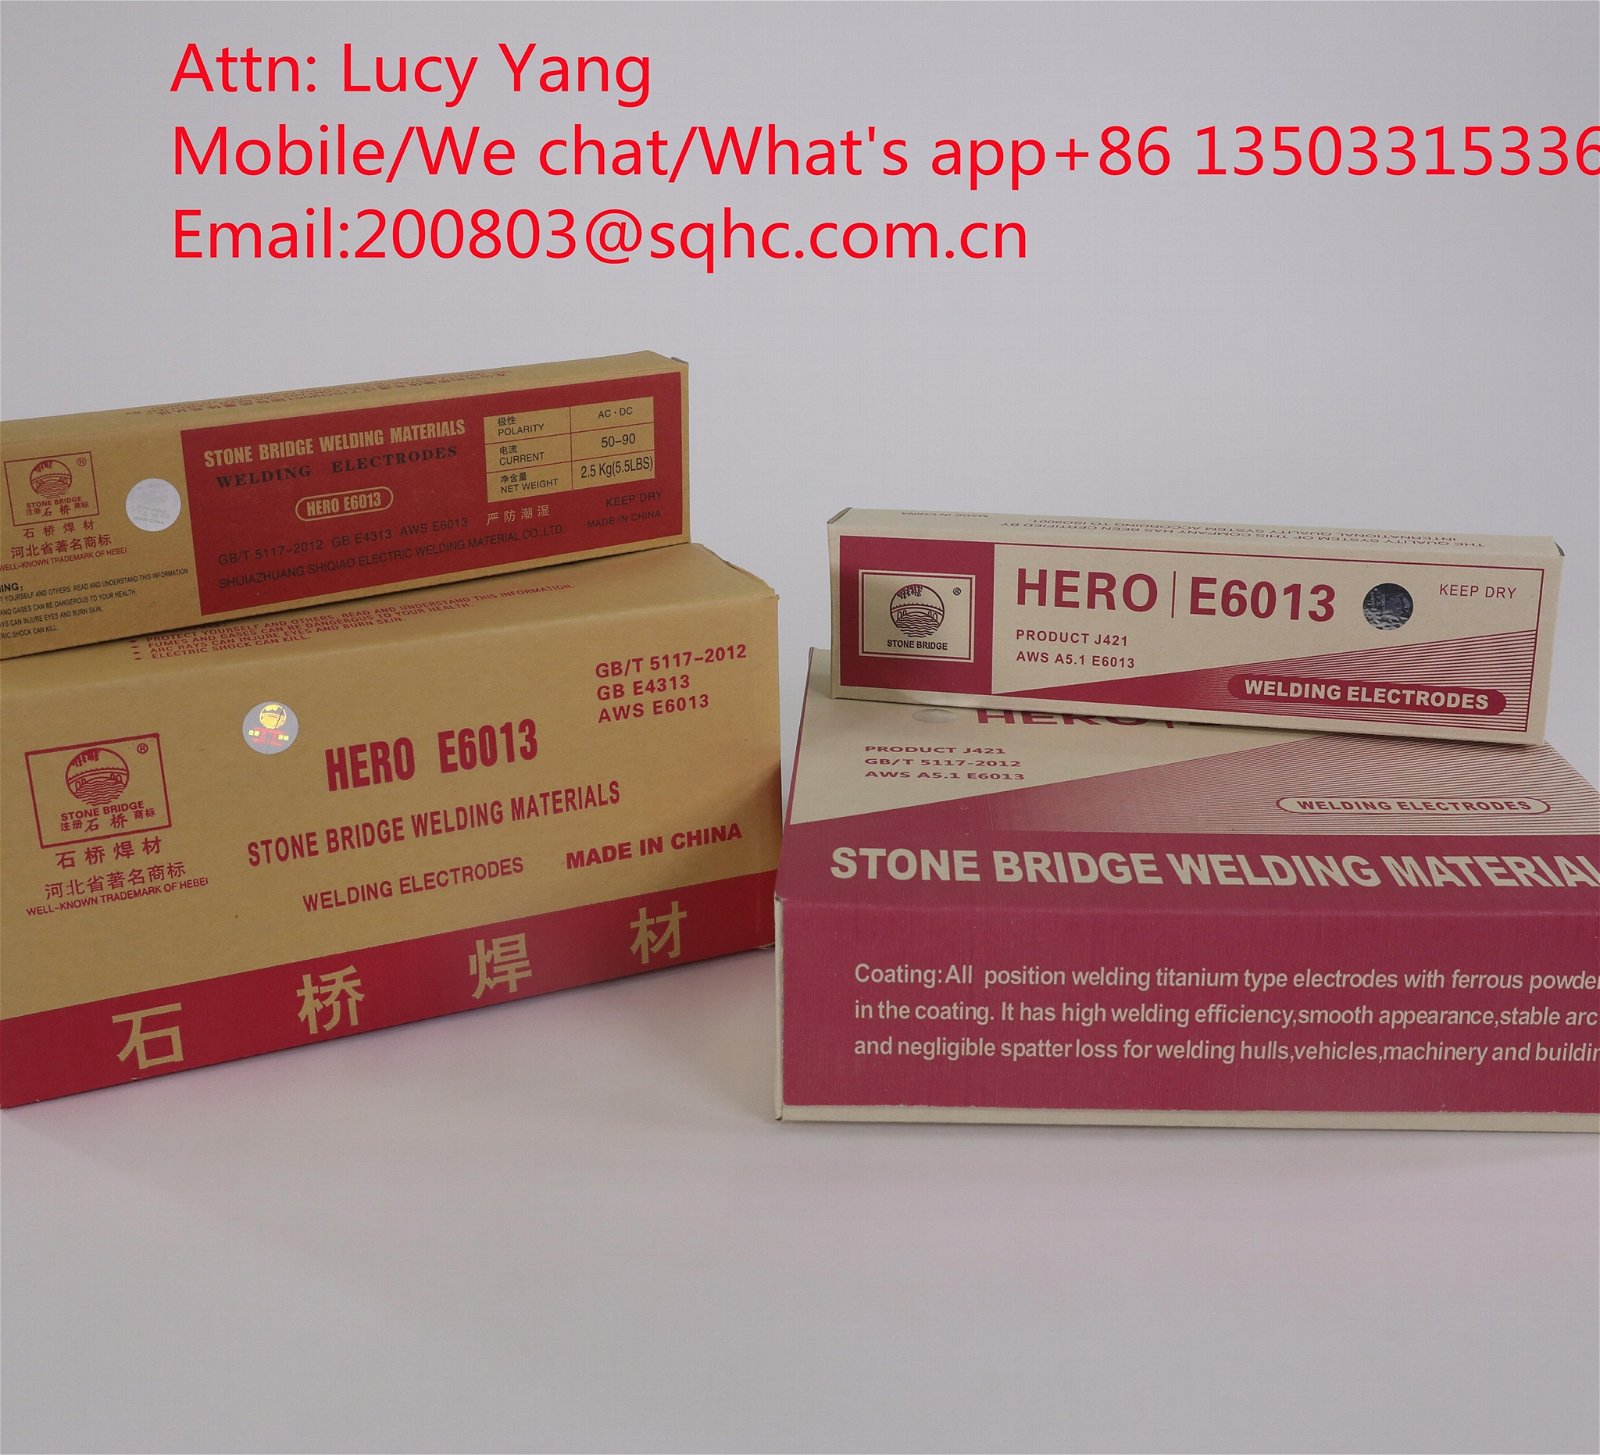 E6013 Attn: Lucy by we chat or what's app+86 13503315336